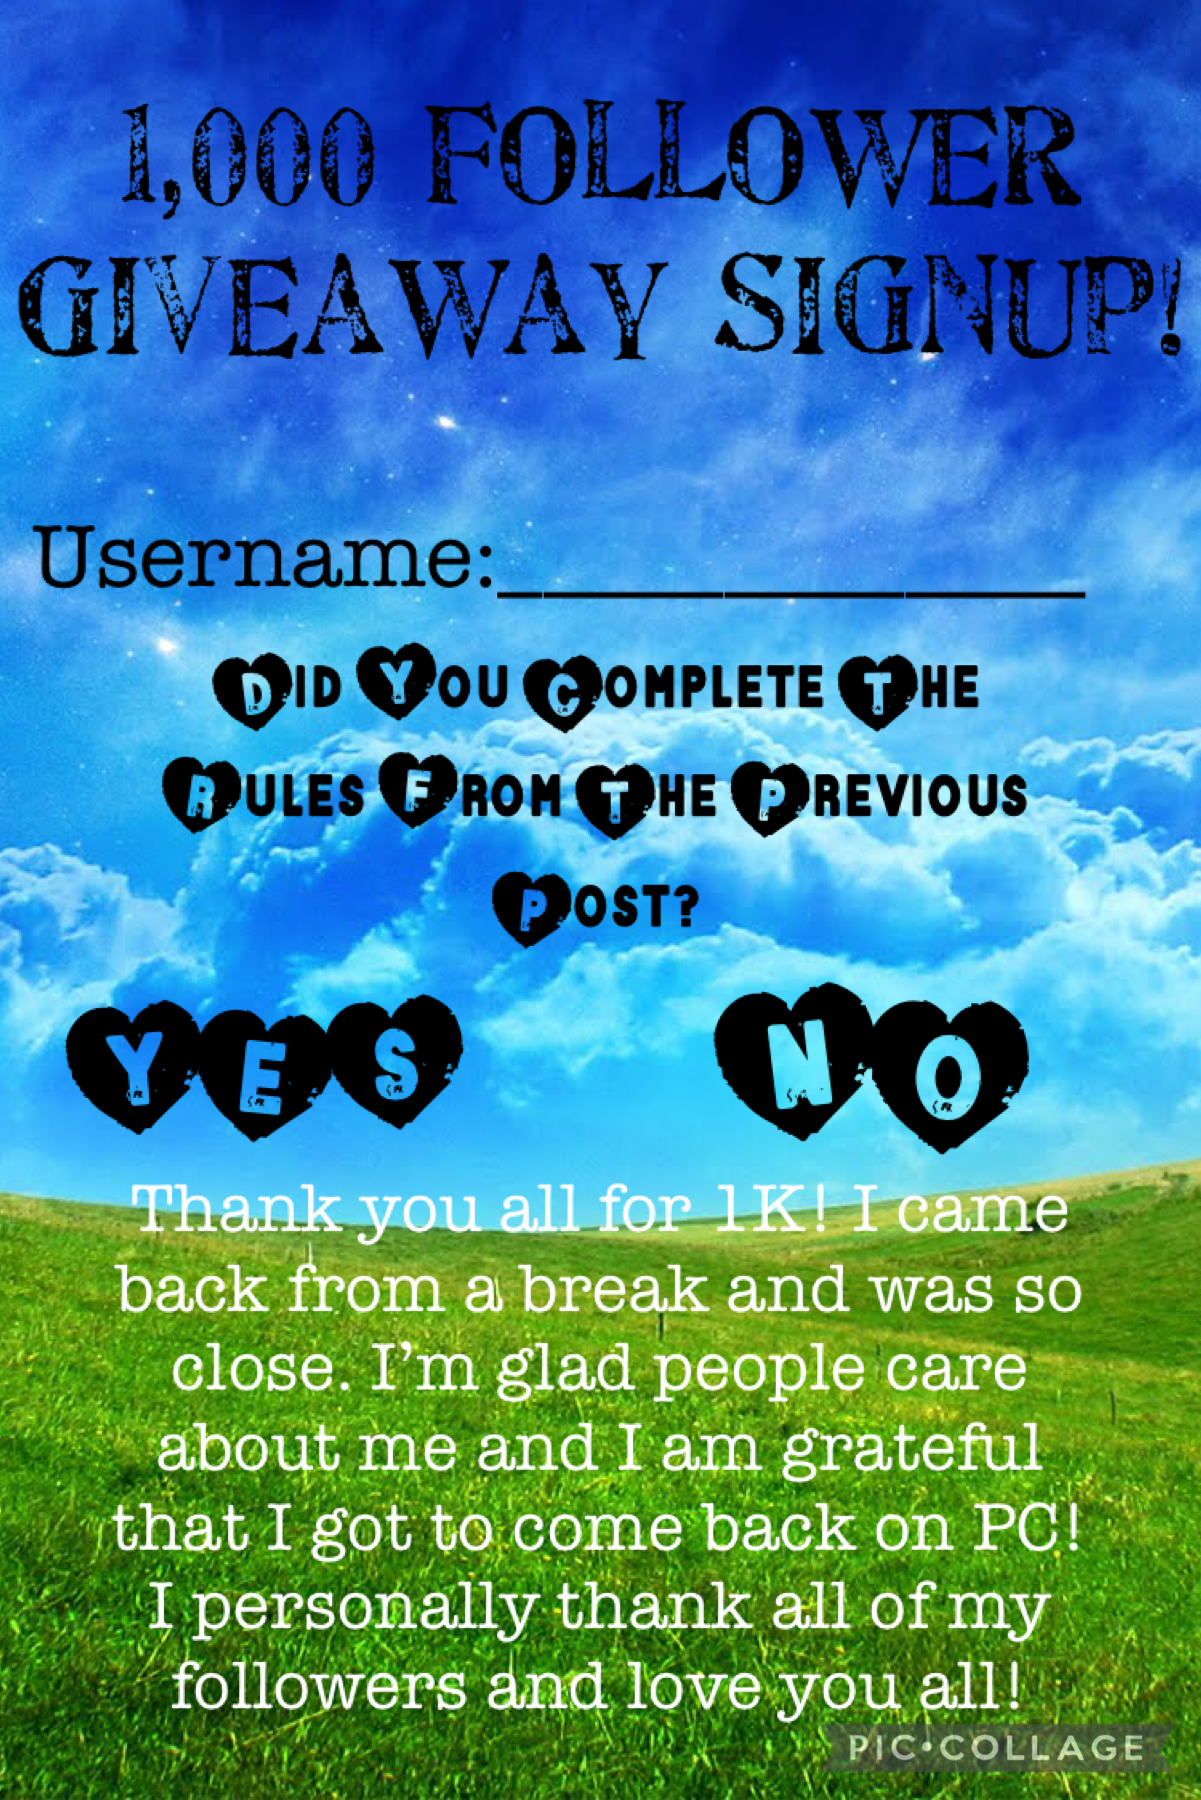 Please sign up for the 1K giveaway here!